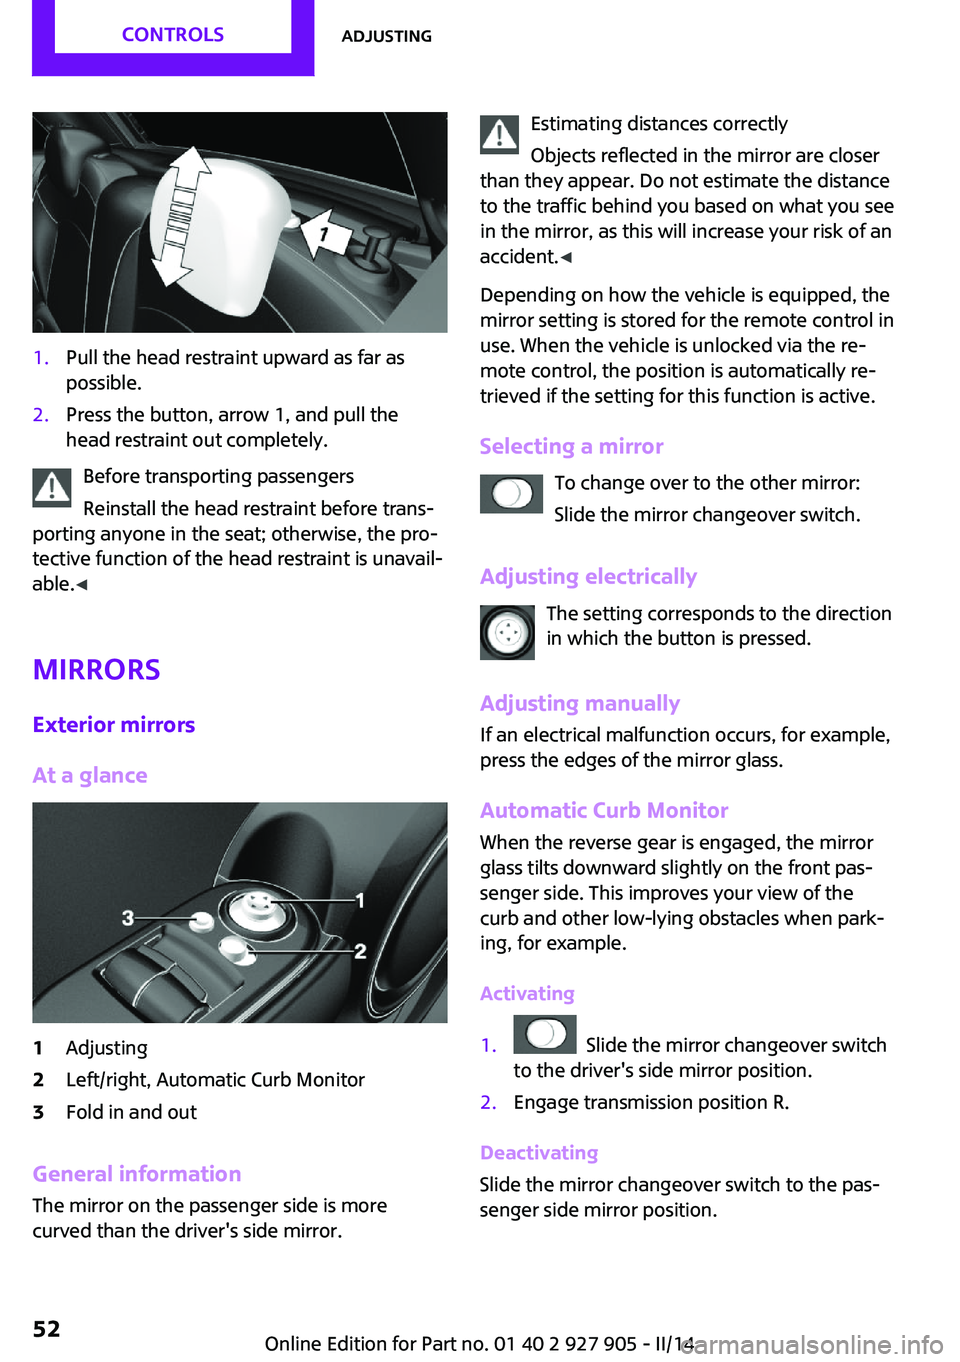 MINI COOPER 2014  Owners Manual 1.Pull the head restraint upward as far as
possible.2.Press the button, arrow 1, and pull the
head restraint out completely.
Before transporting passengers
Reinstall the head restraint before trans‐